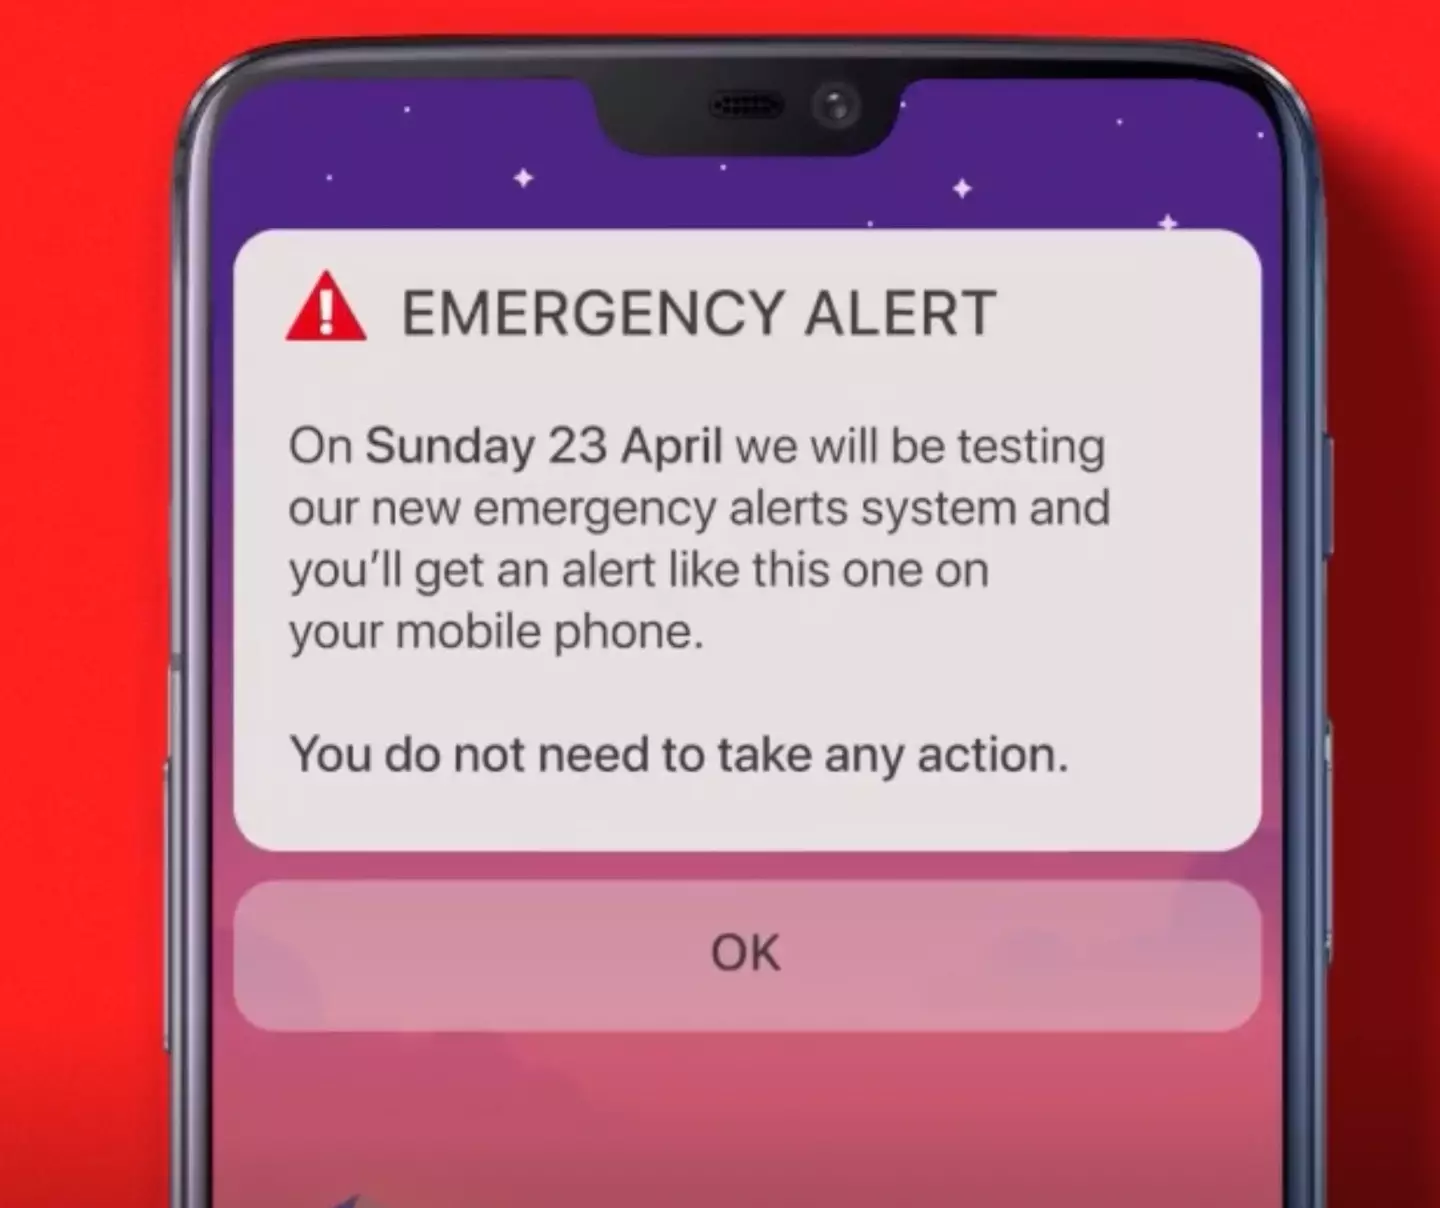 An emergency alert will be sent out later this month.